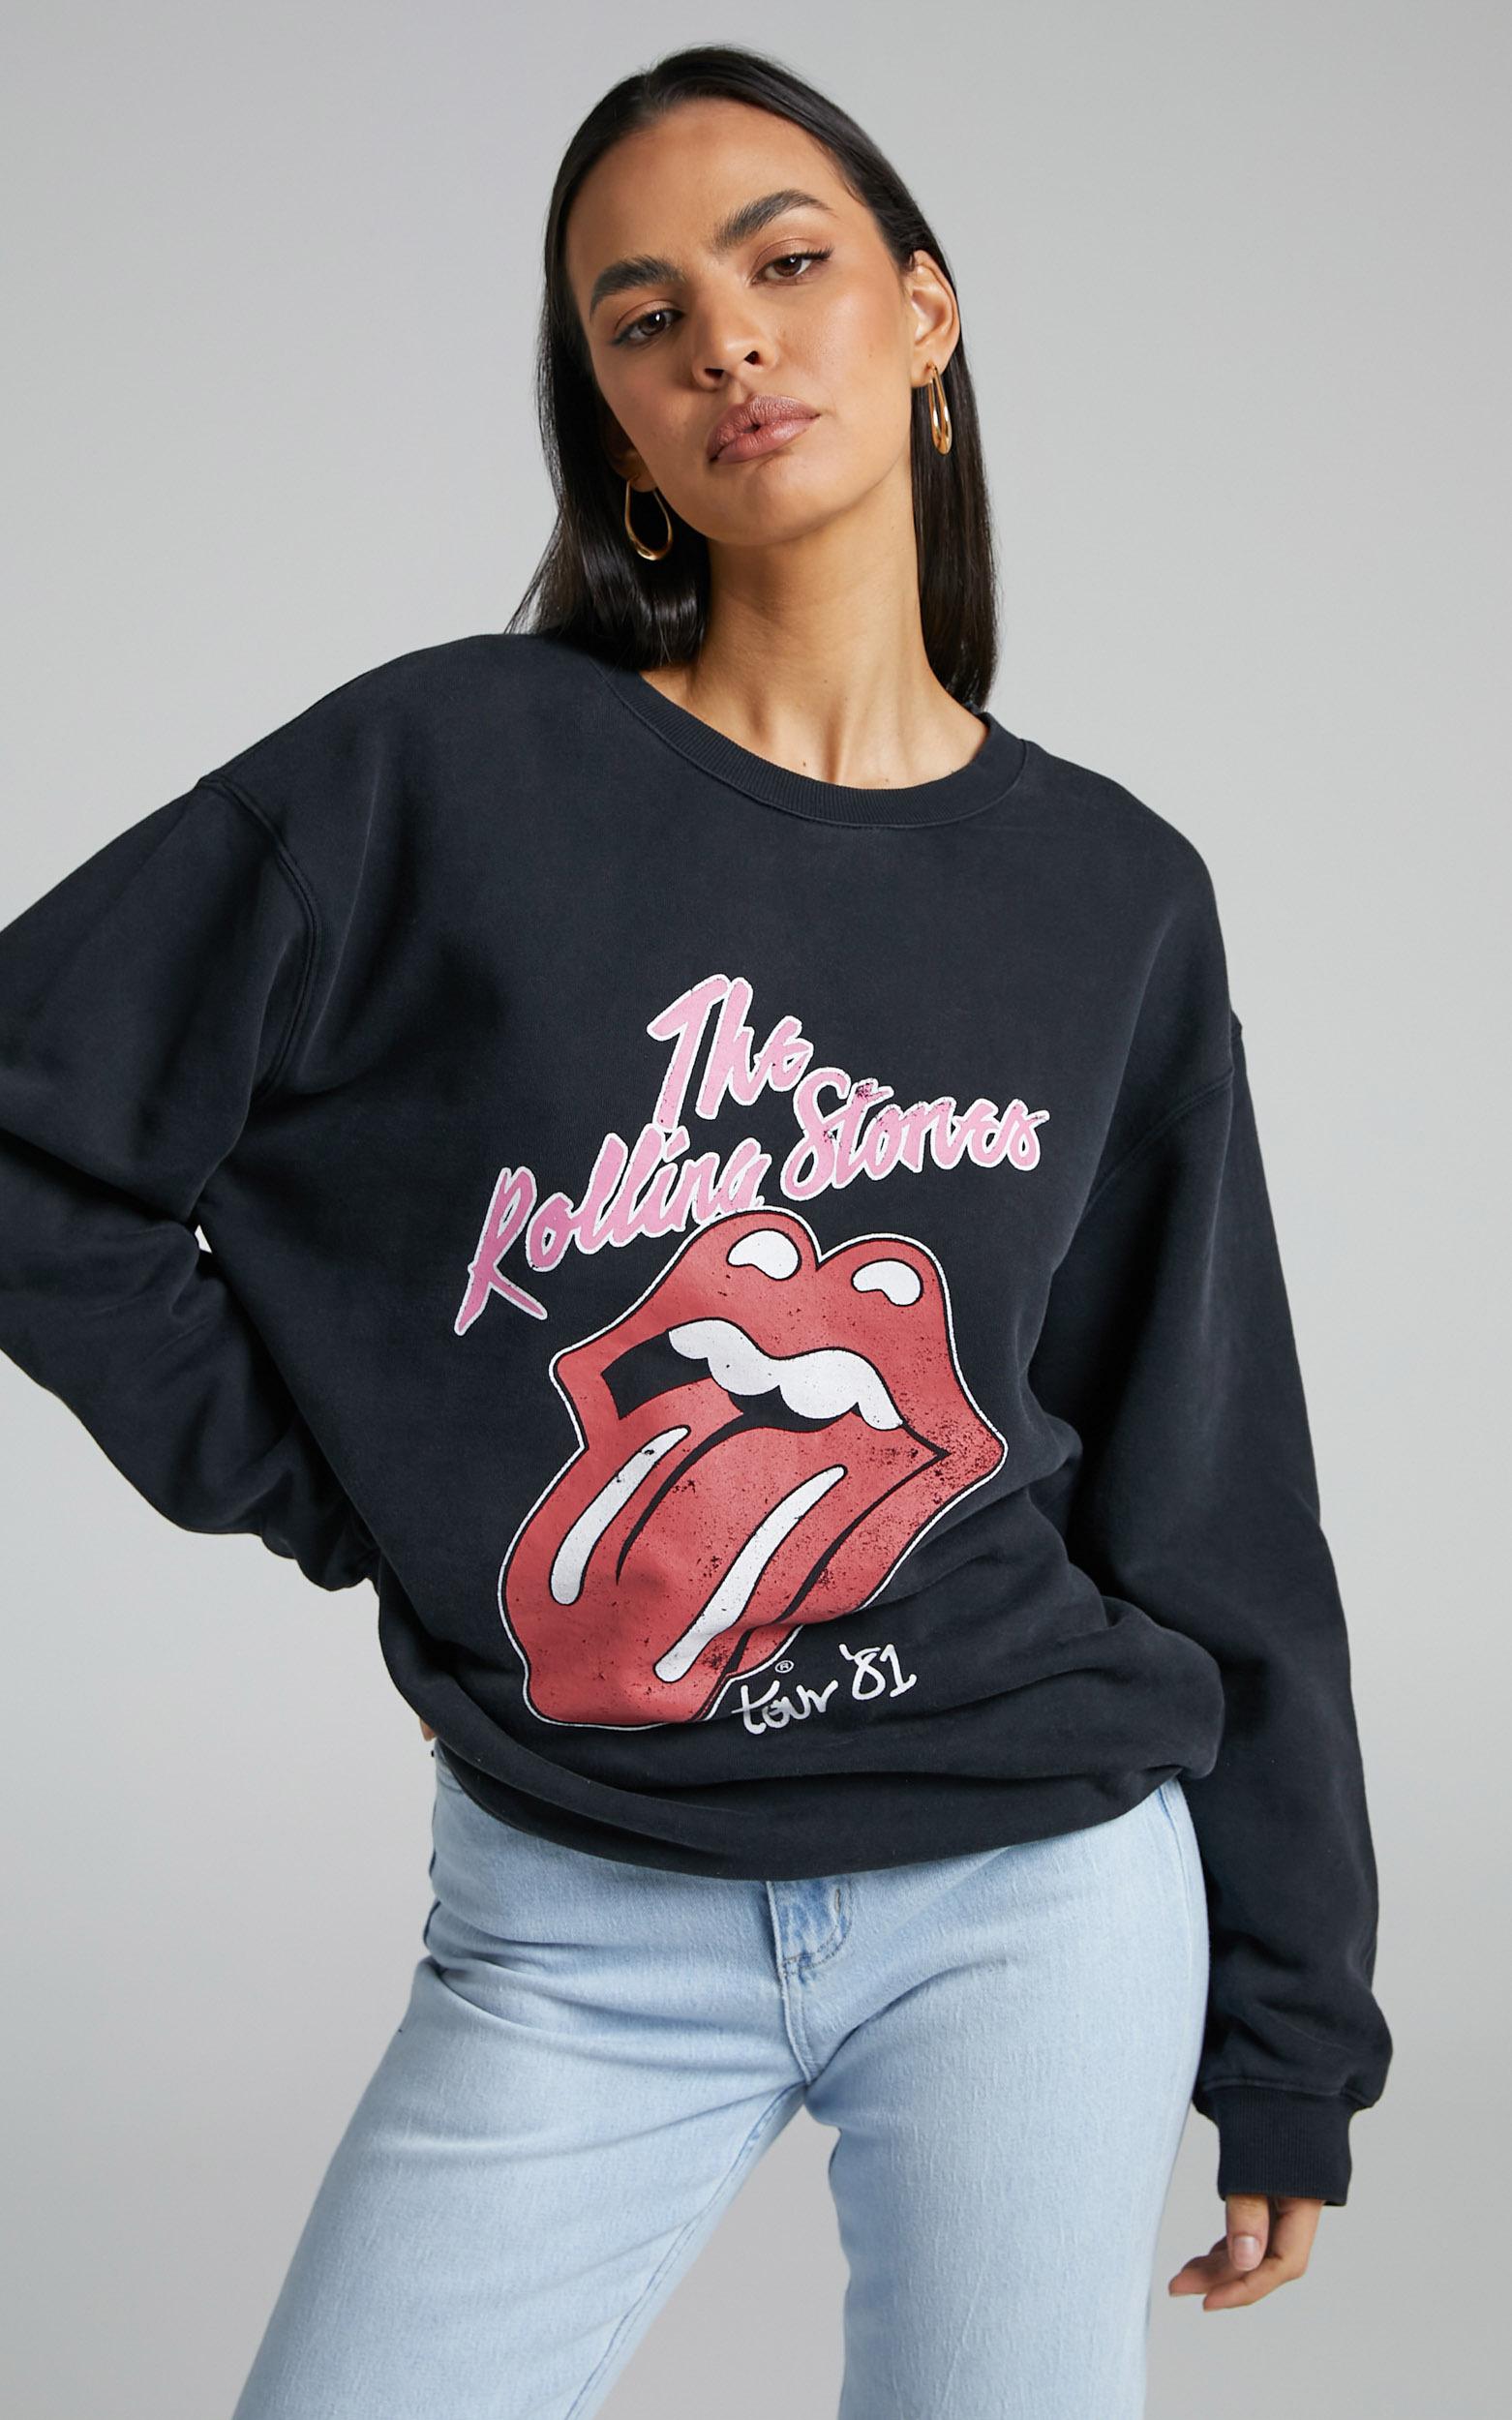 Universal Music - Rolling Stones Crew Neck Sweater in Washed Black - M/L, BLK1, hi-res image number null